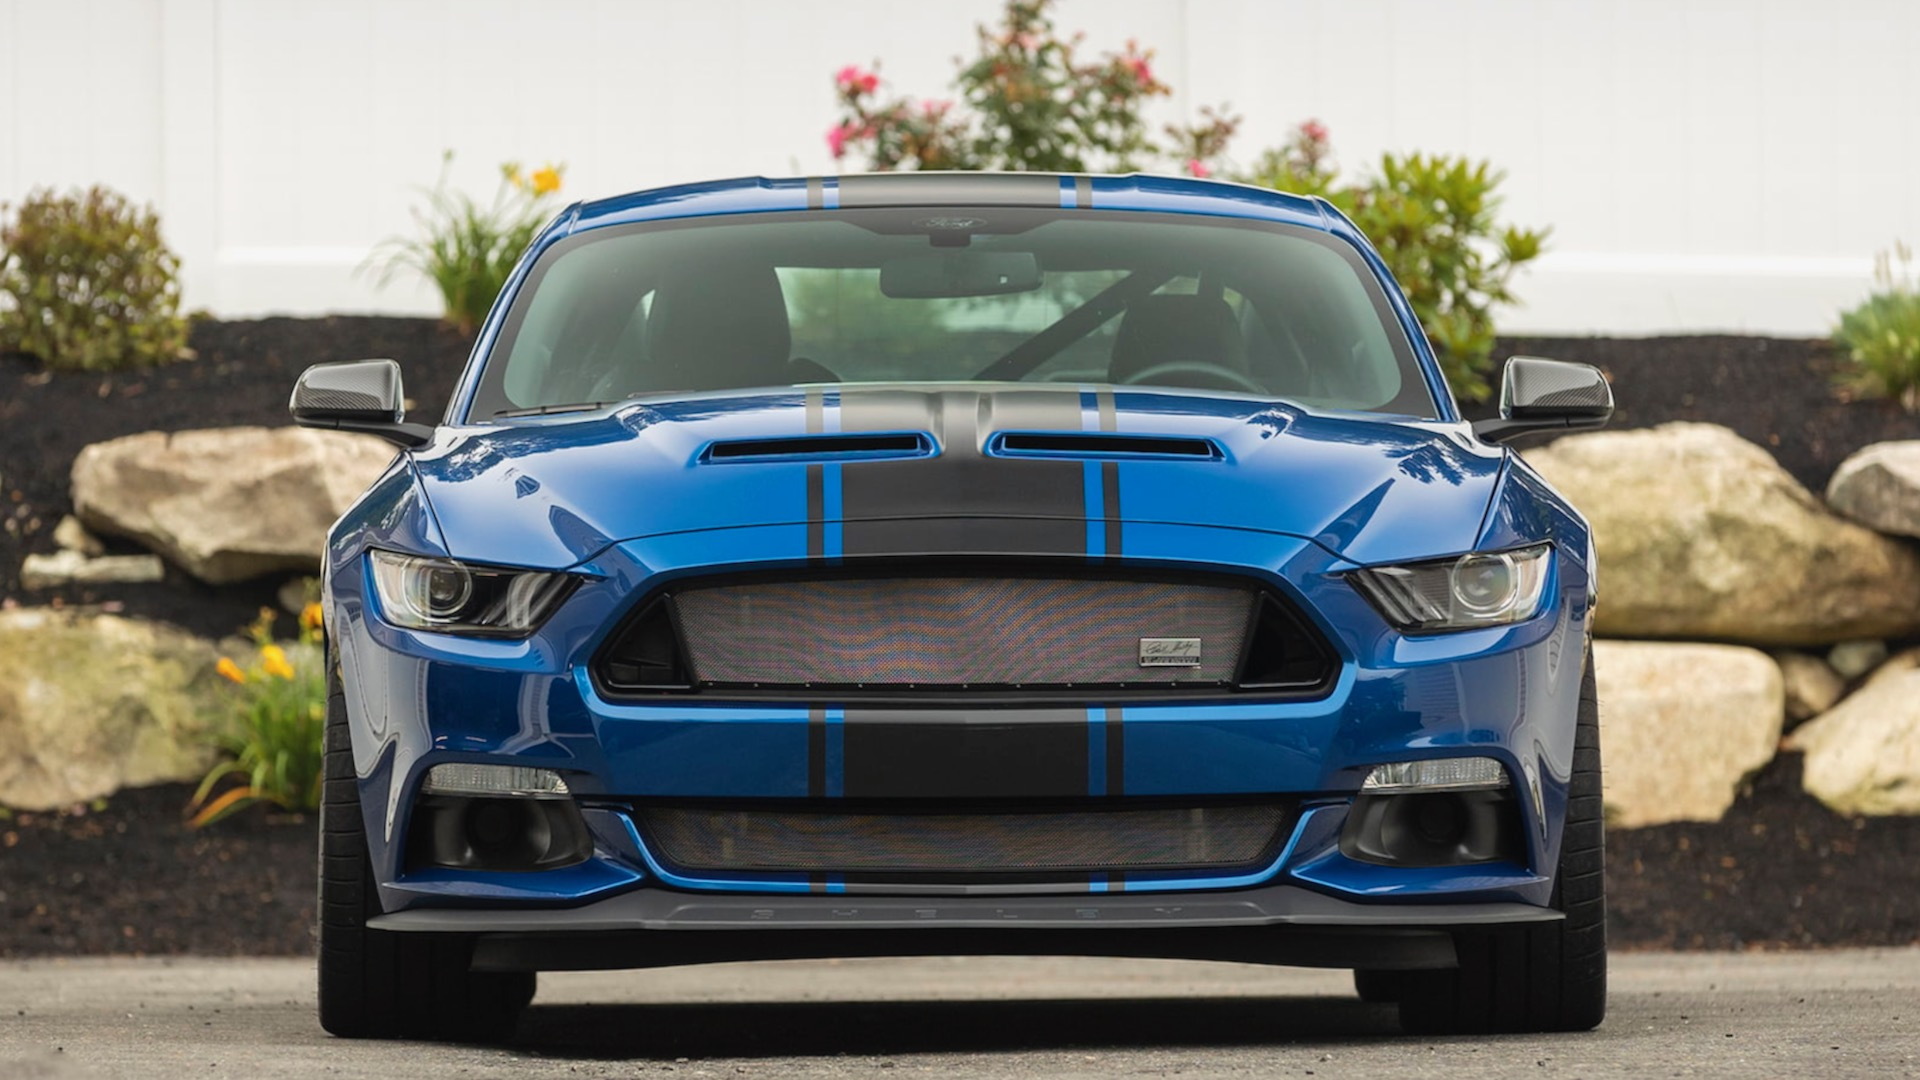 2017 Ford Mustang Shelby Super Snake Widebody concept (photo via Mecum Auctions)